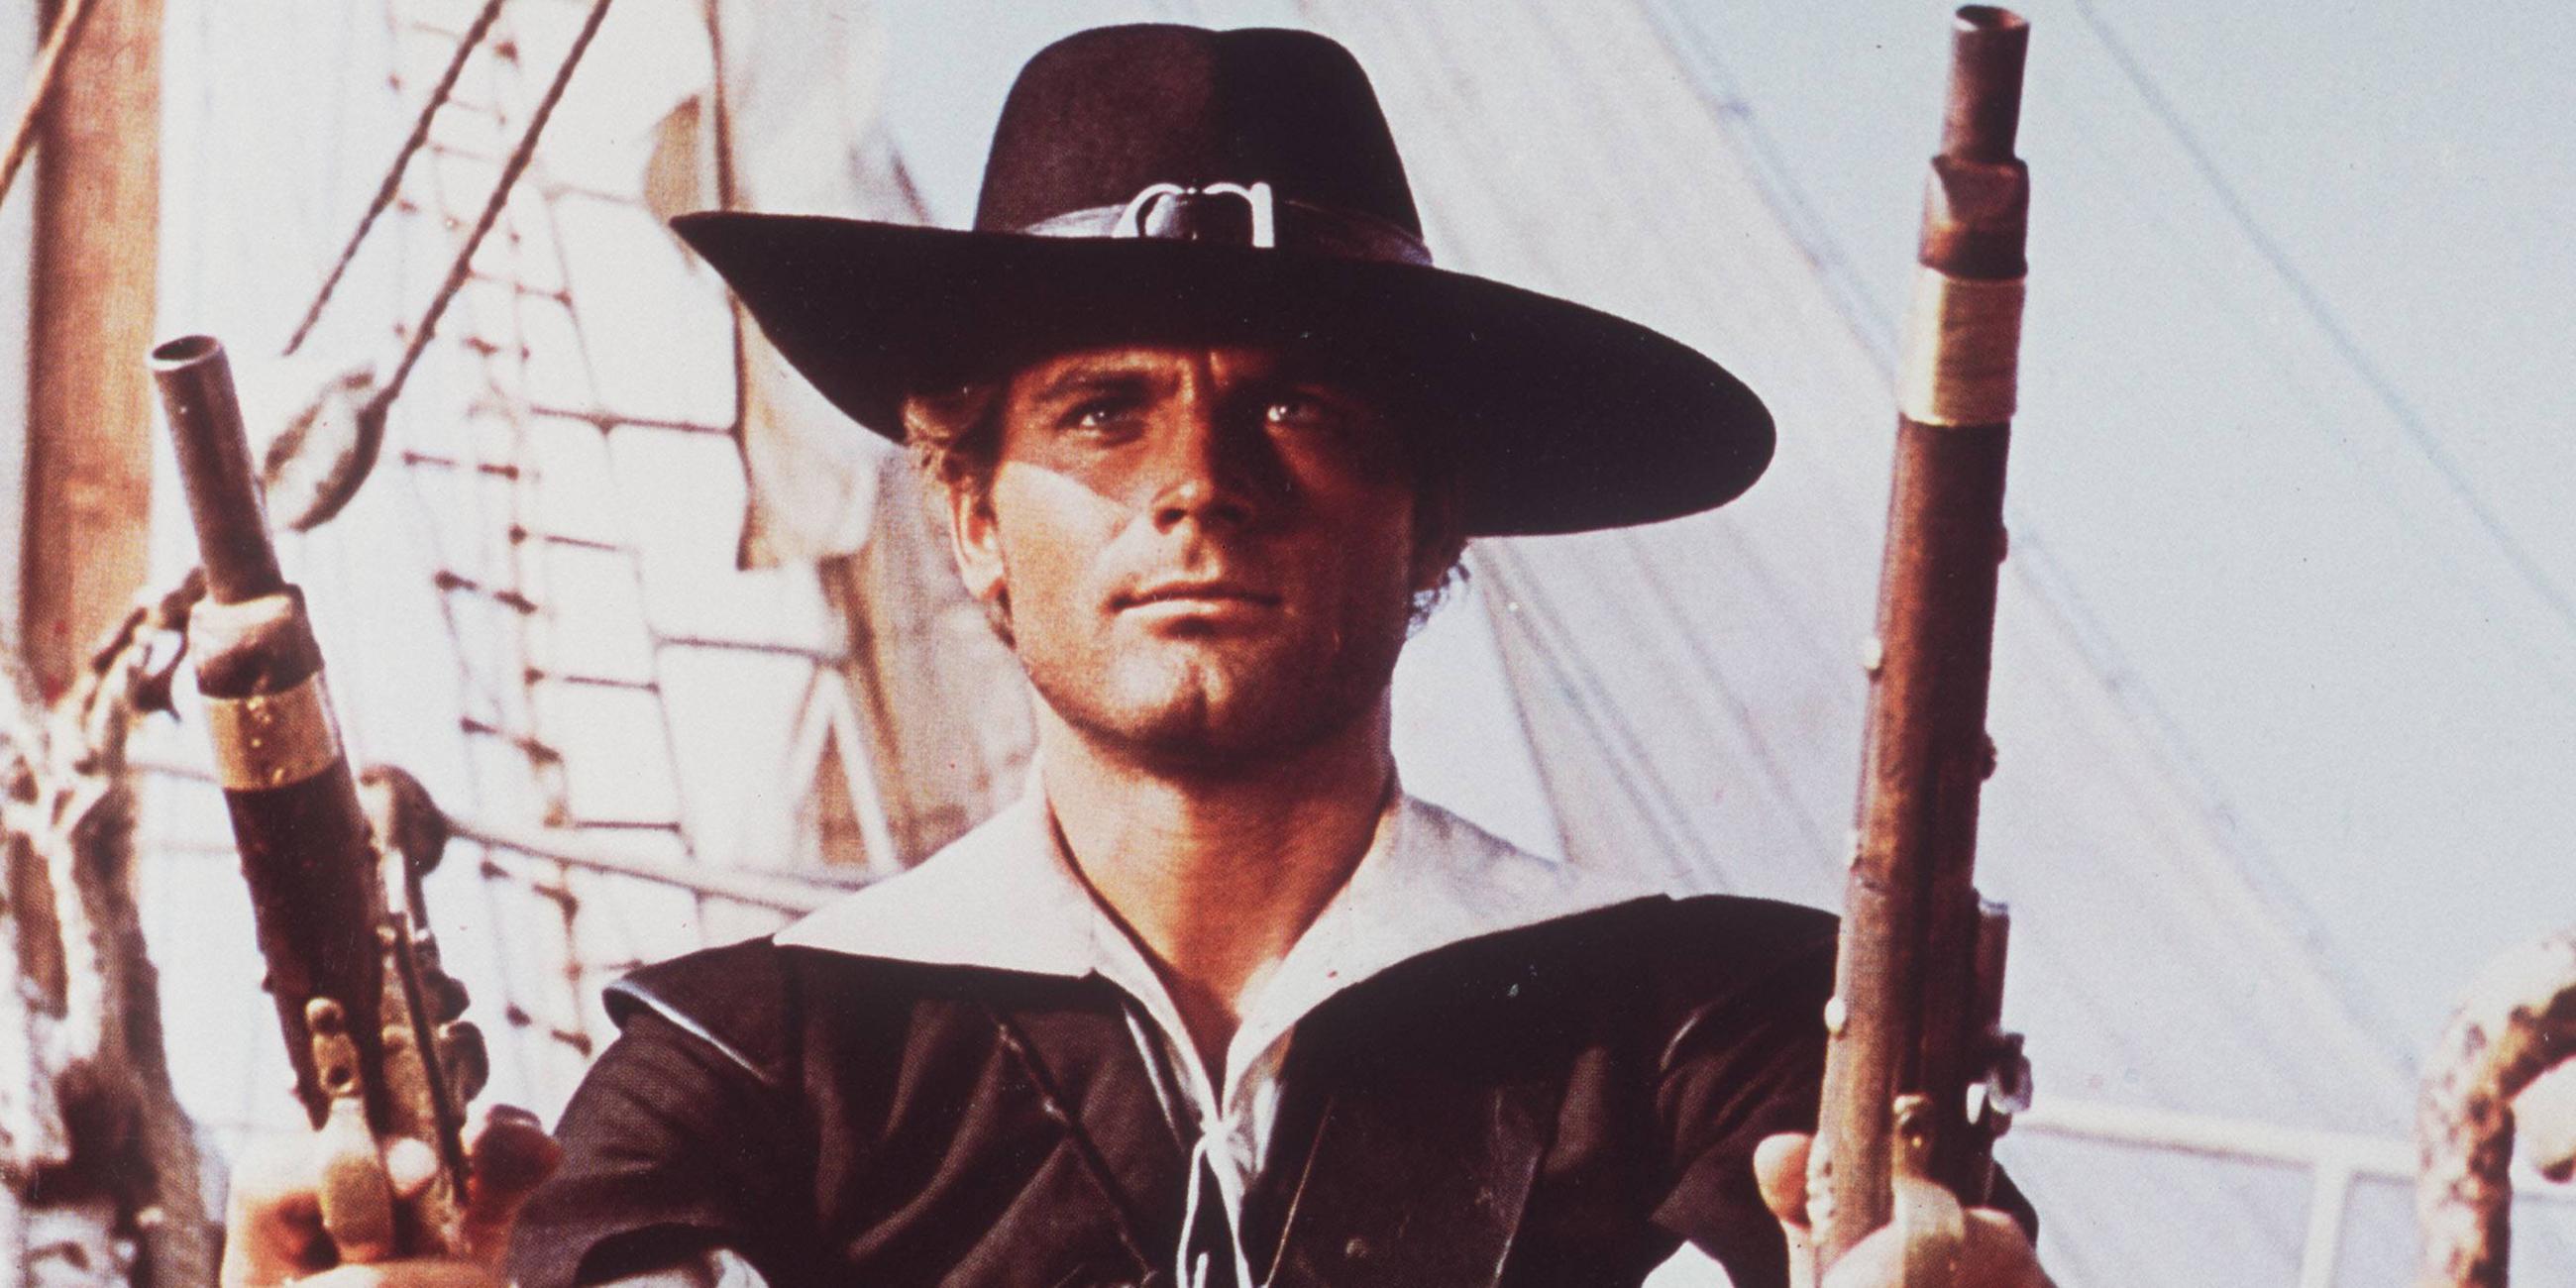 Archiv: Terence Hill im Jahre 1971